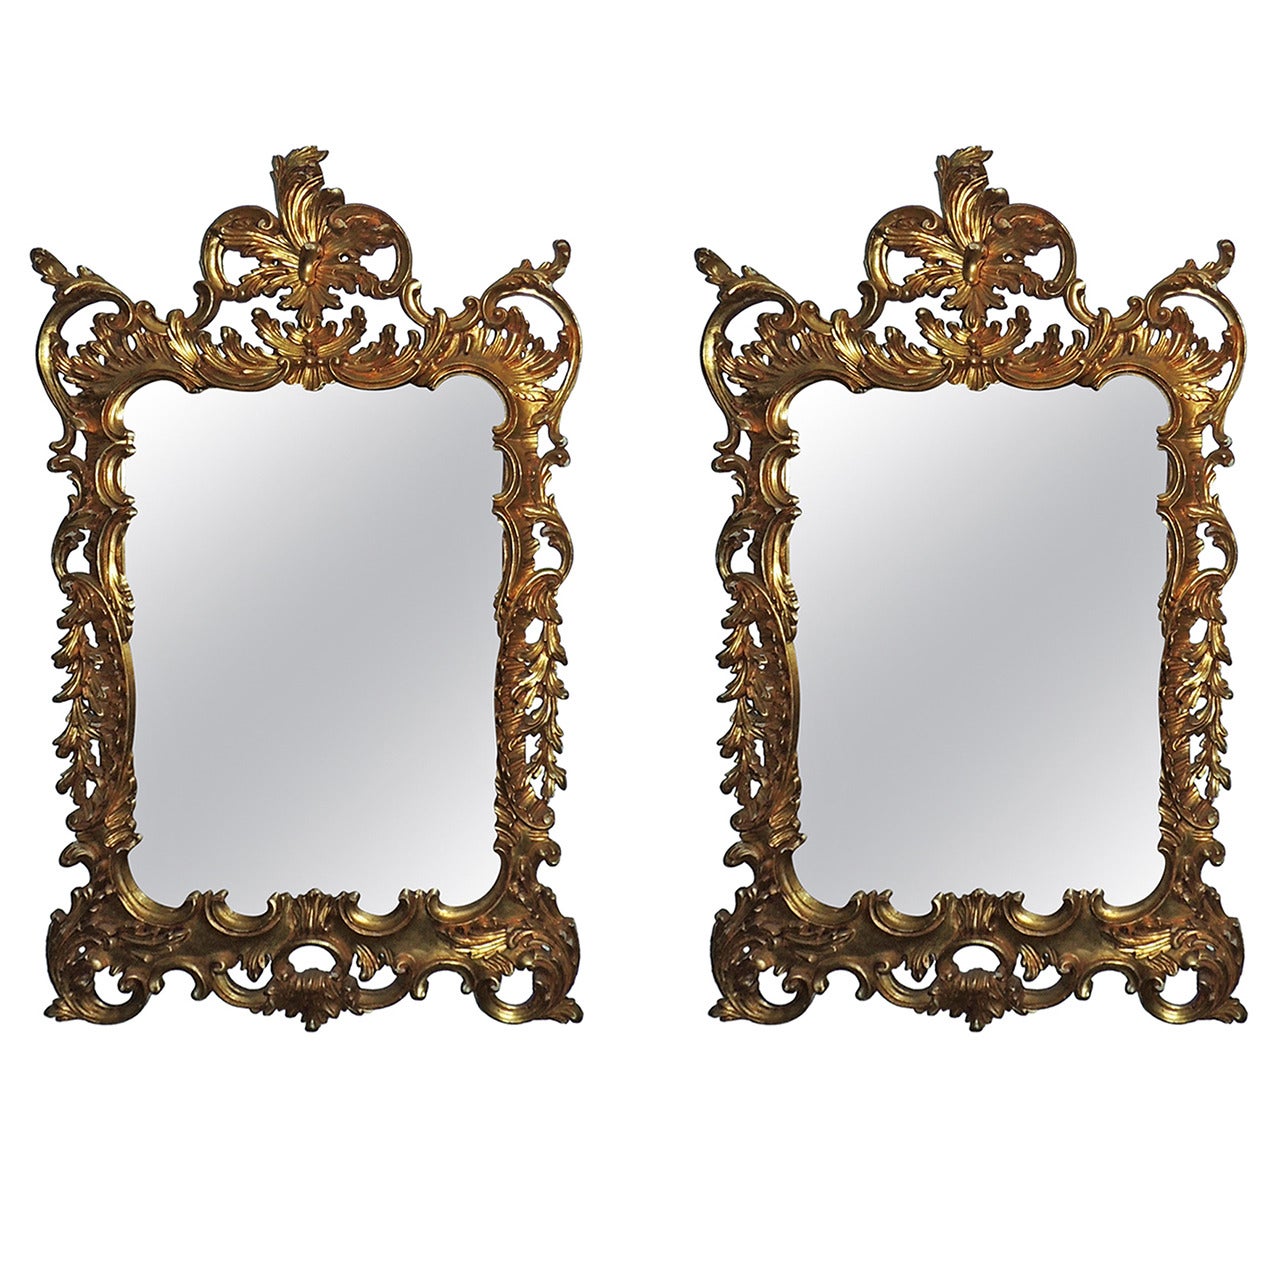 Wonderful Pair of Italian Gilt Carved Wood Rococo Mirrors with Beveled Edges